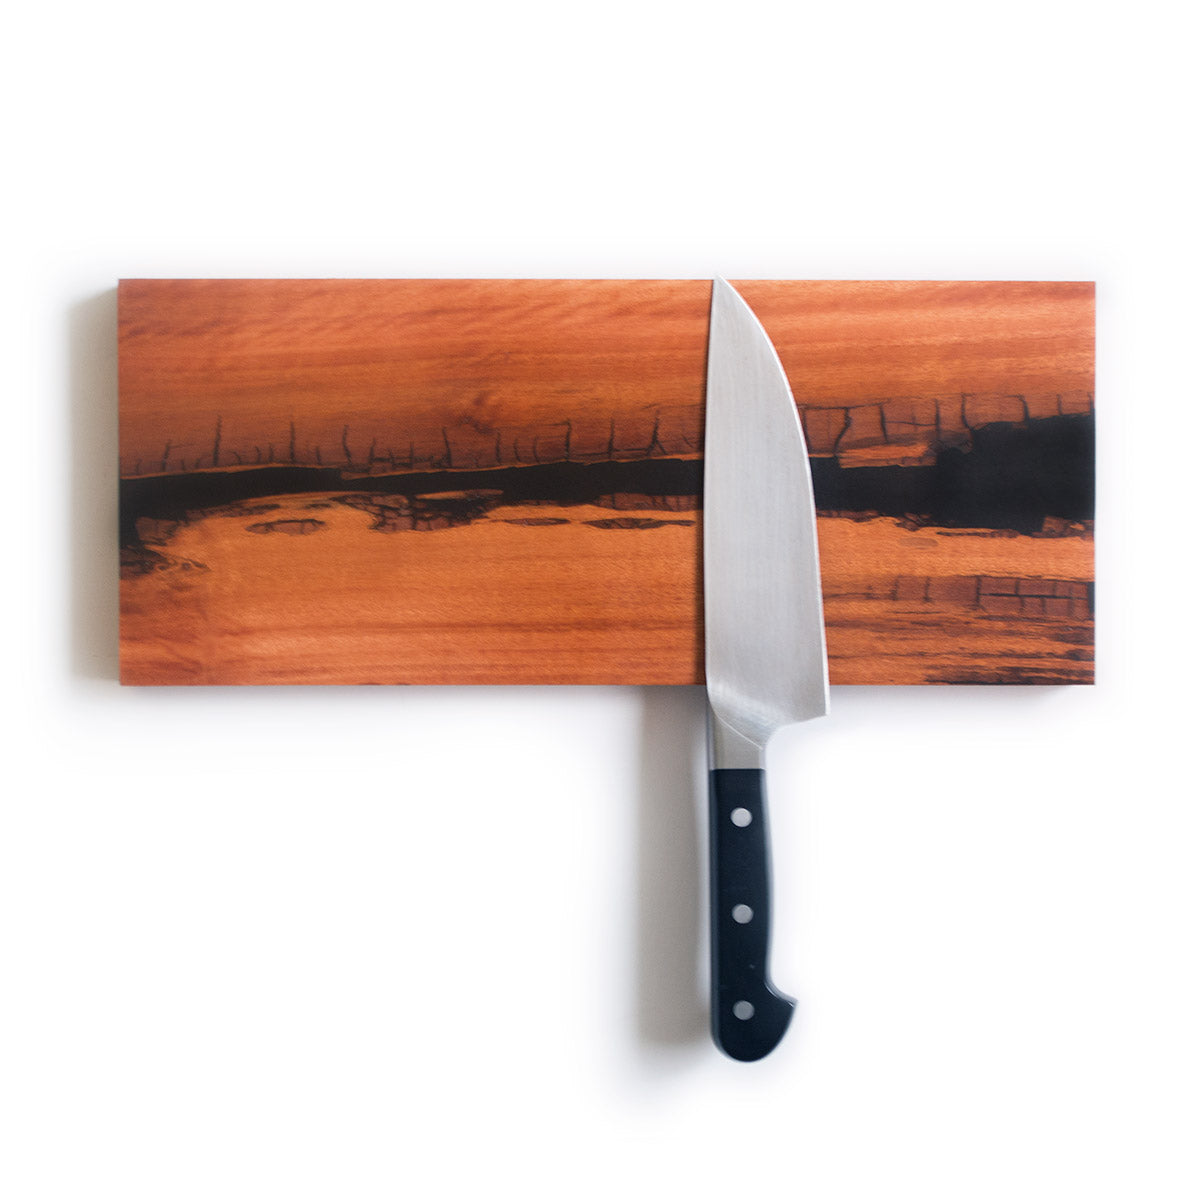 magnetic knife holder made with live edge flamewood hardwood and a black epoxy resin river